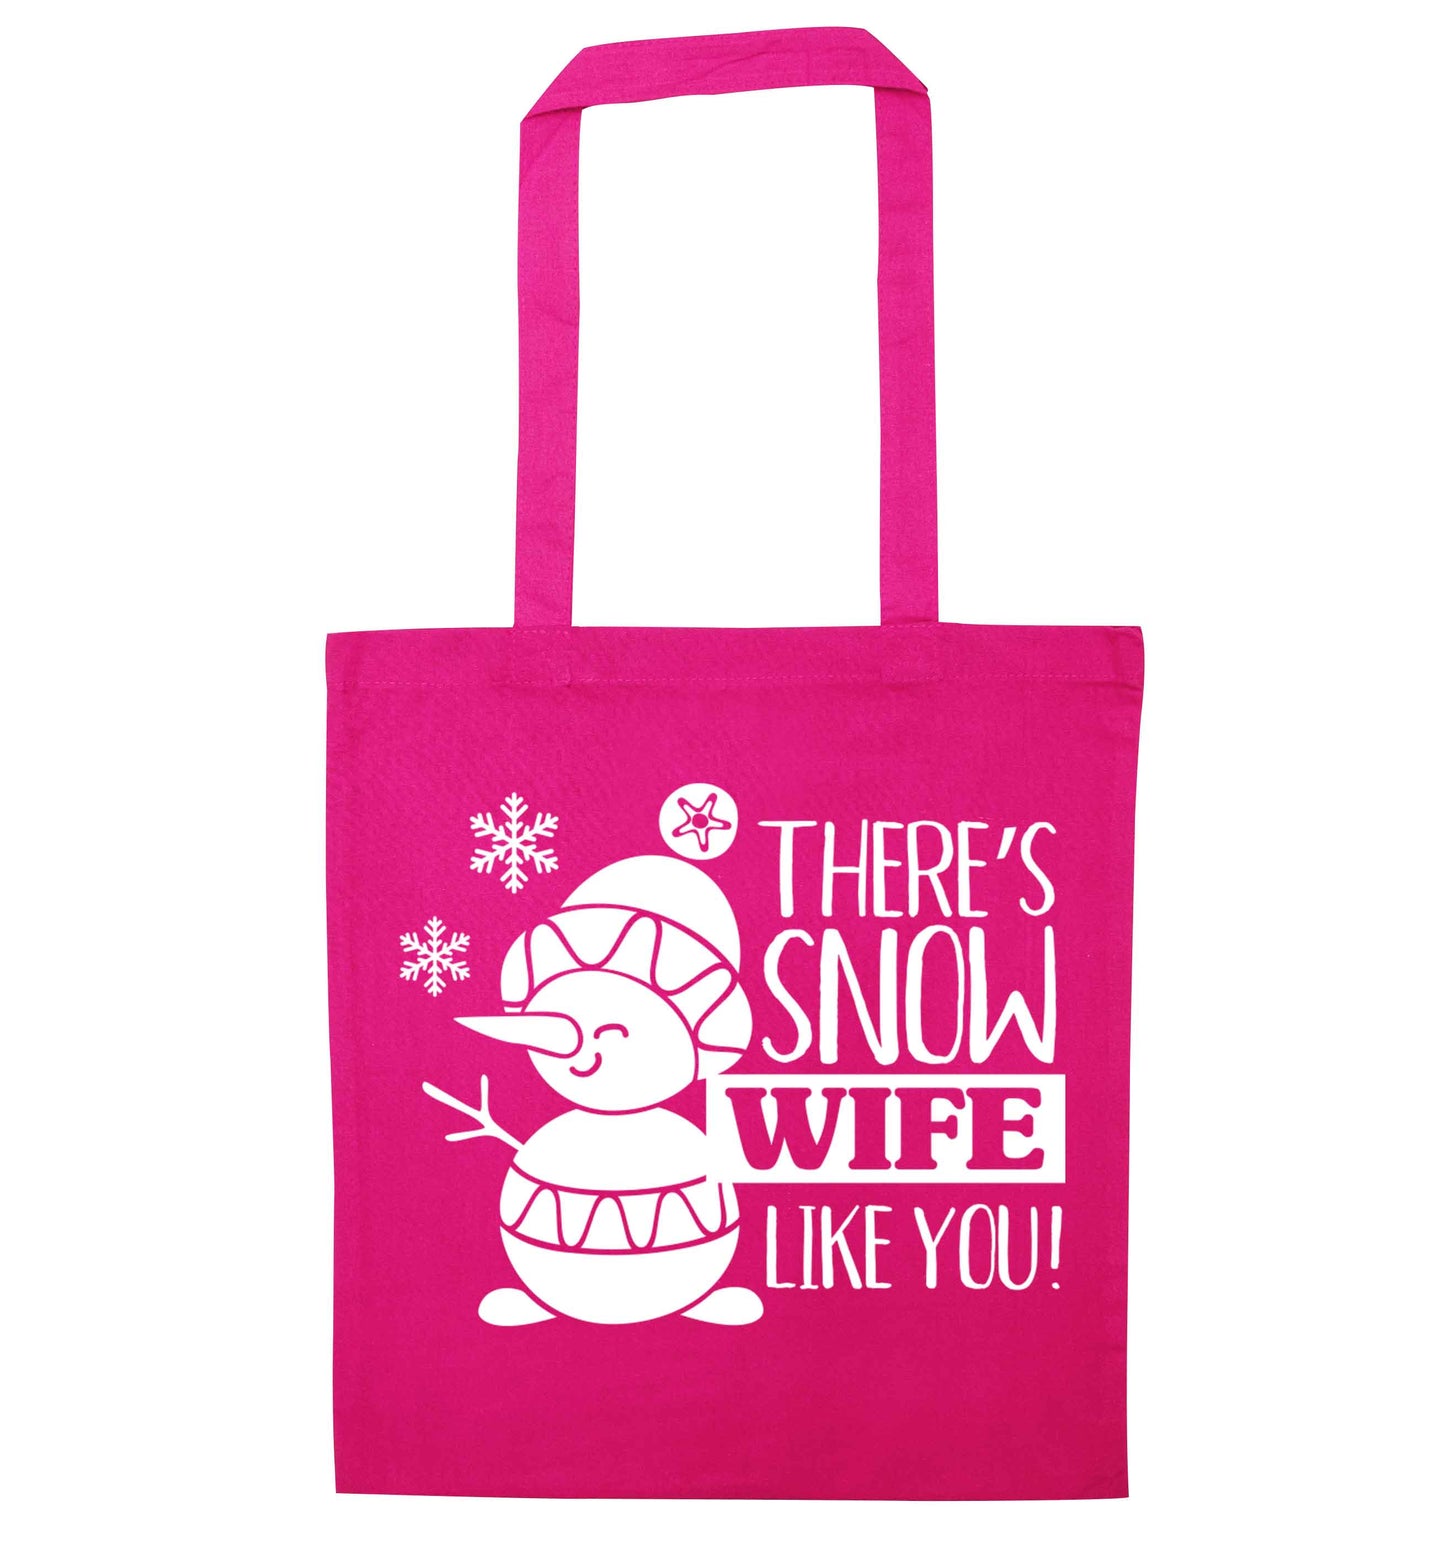 There's snow wife like you pink tote bag